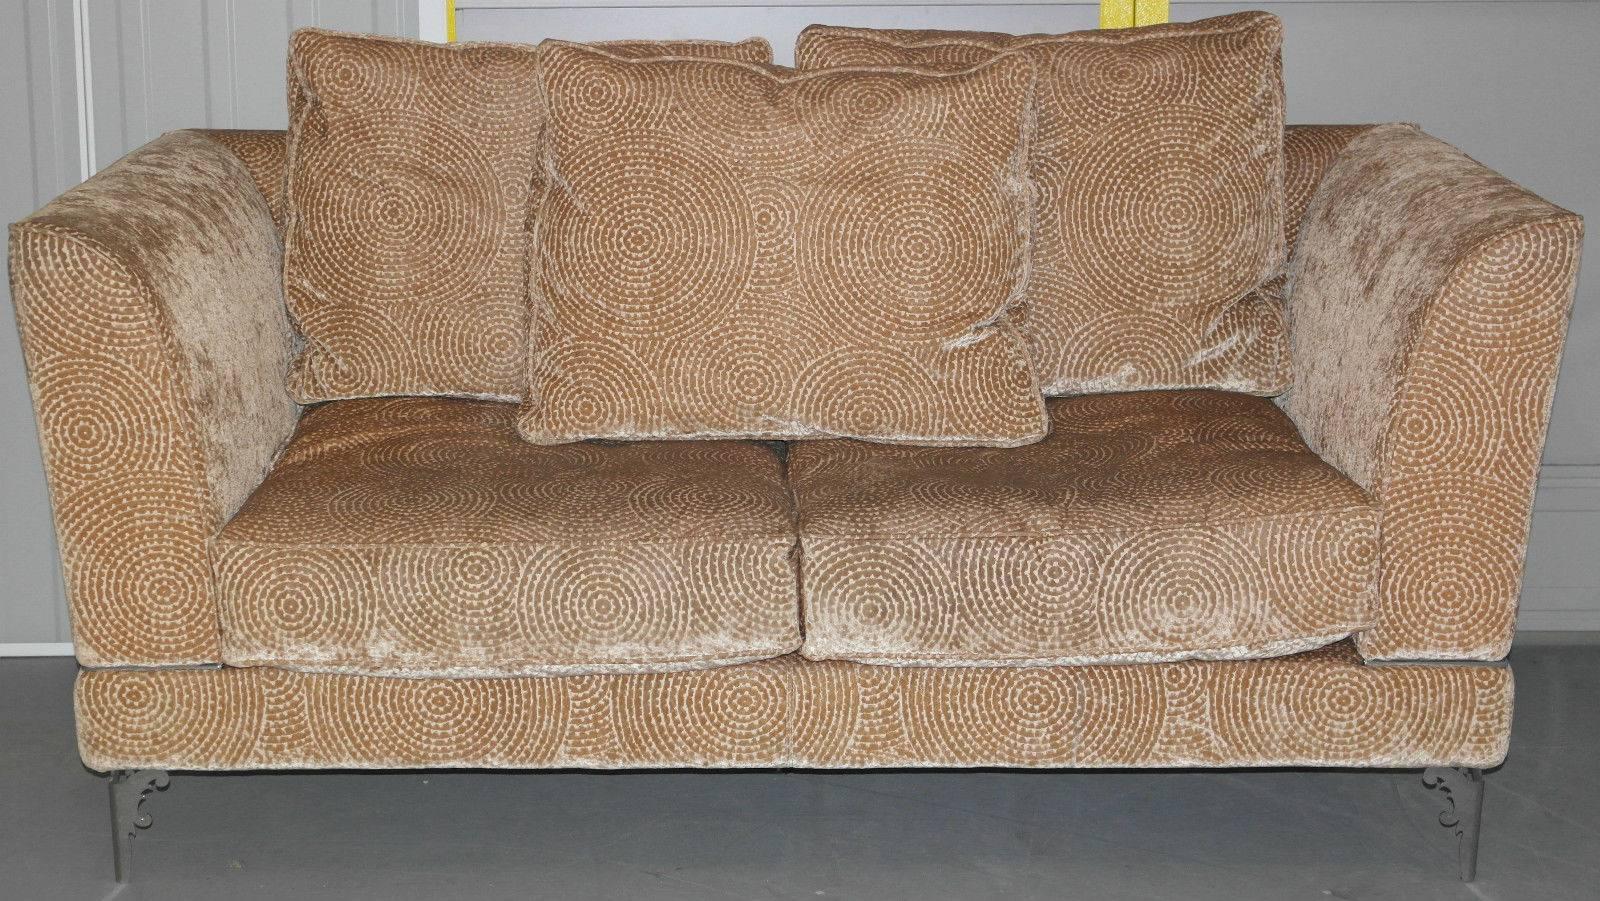 We are delighted to offer for sale this lovely brand new IPE Cavalli velvet sofa

This sofa has solid chrome sculpted legs, a solid chrome base line, luxury velvet upholstery and split feather filled cushions 

This pieces retails in the tens of